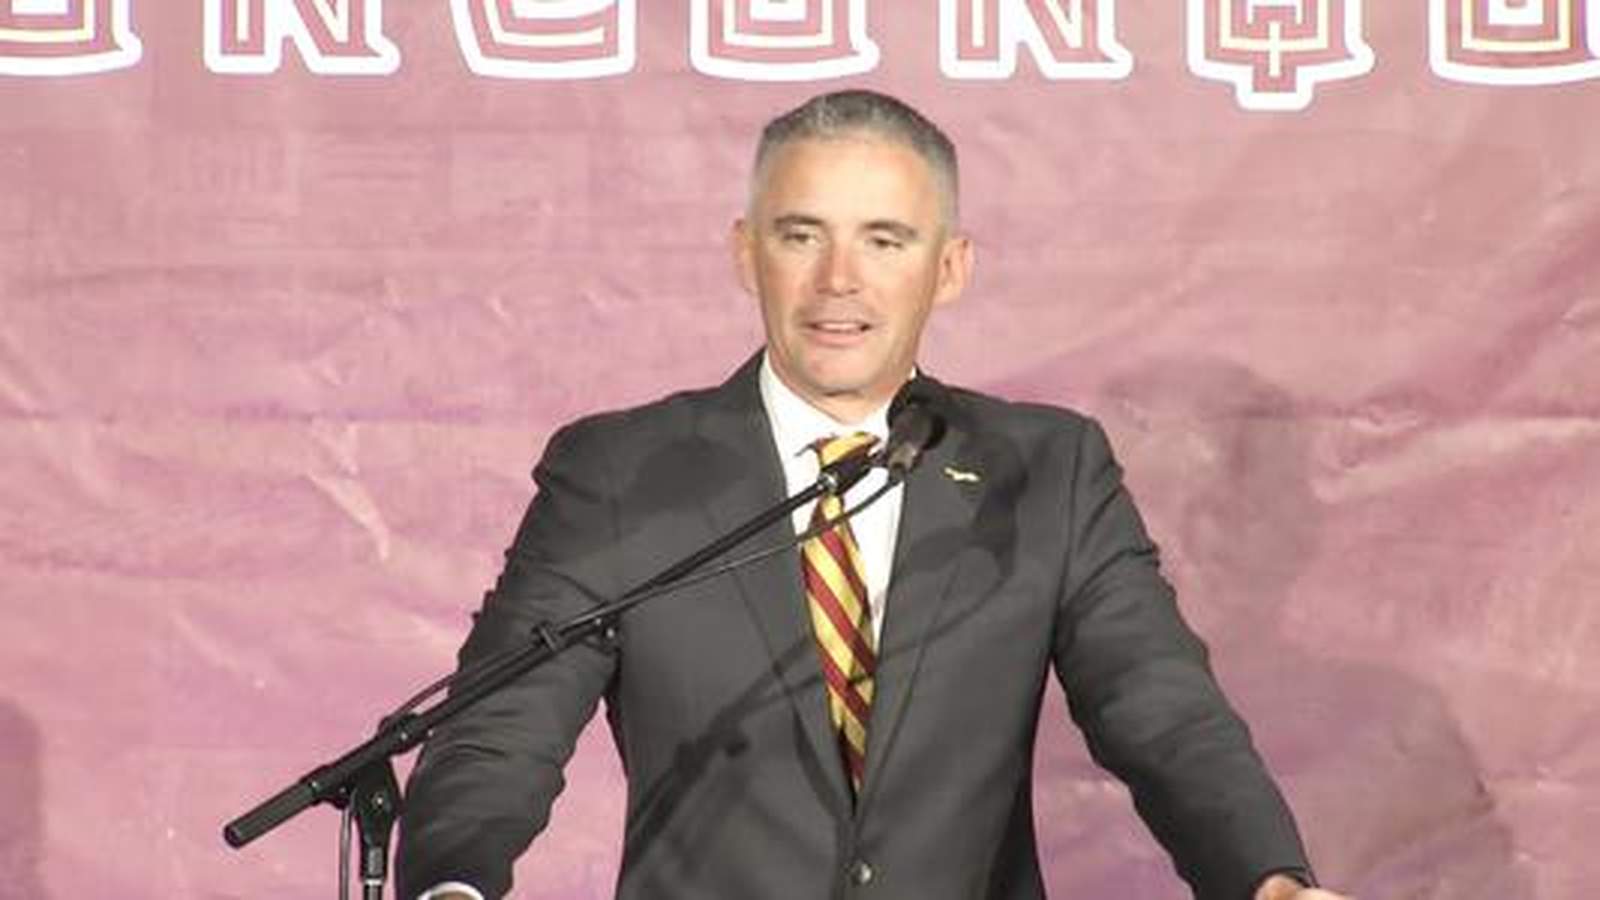 Florida State introduces Mike Norvell as new head football coach